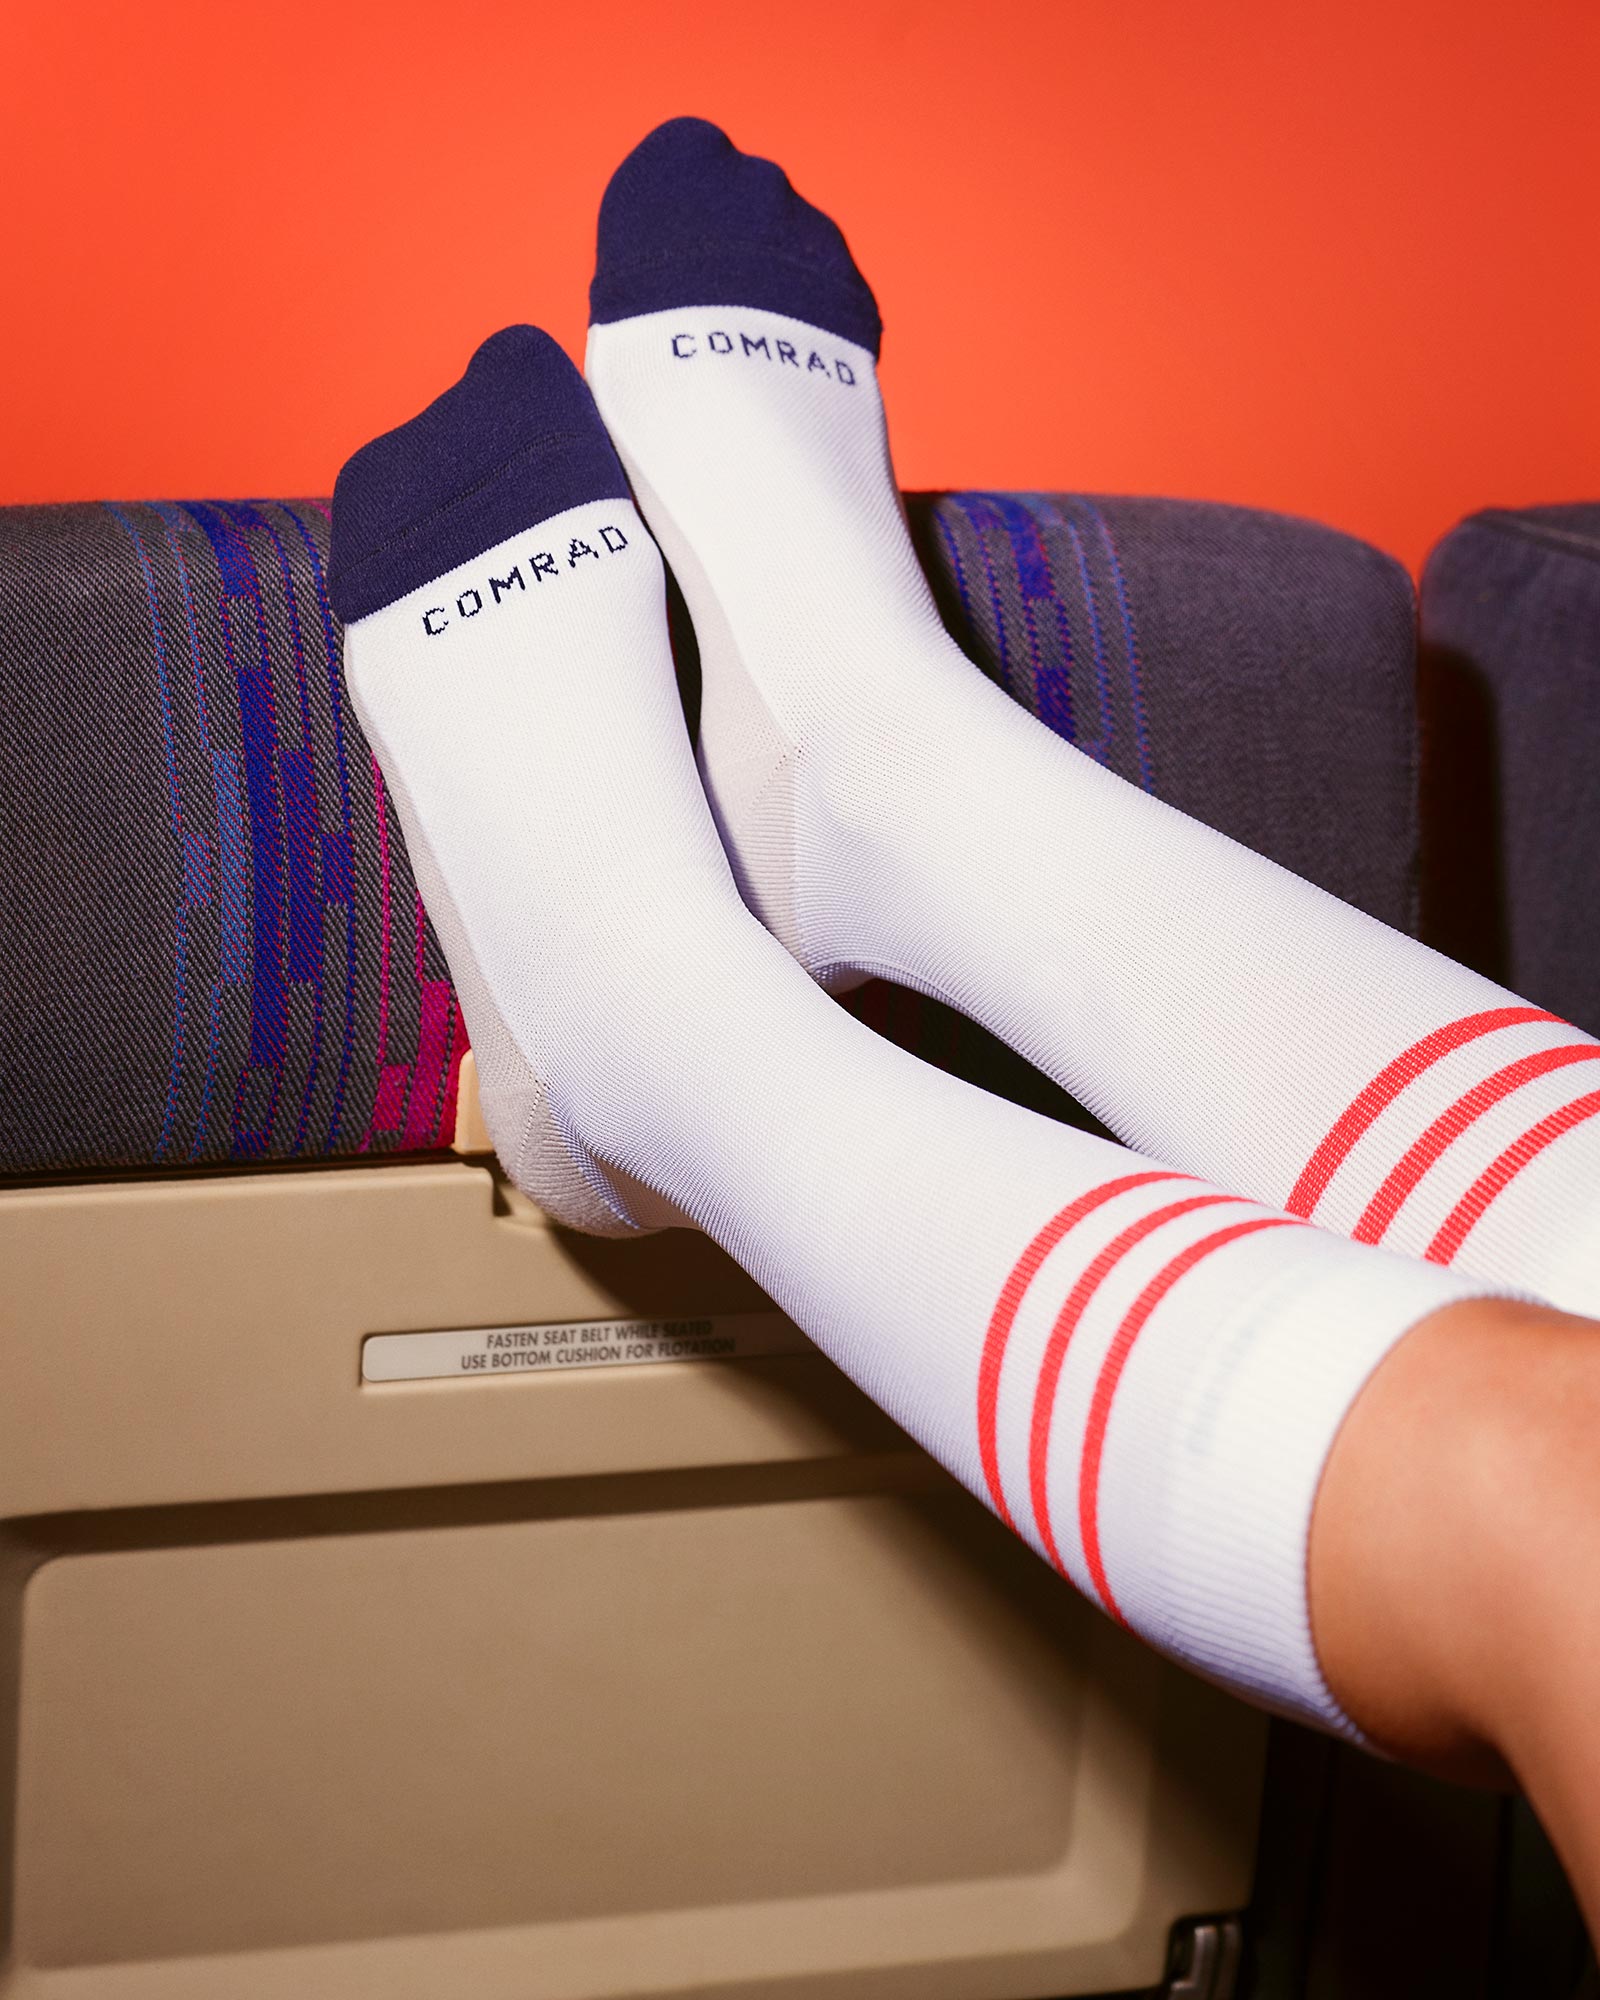 Should I Wear Compression Socks During or After a Workout? - Supporo